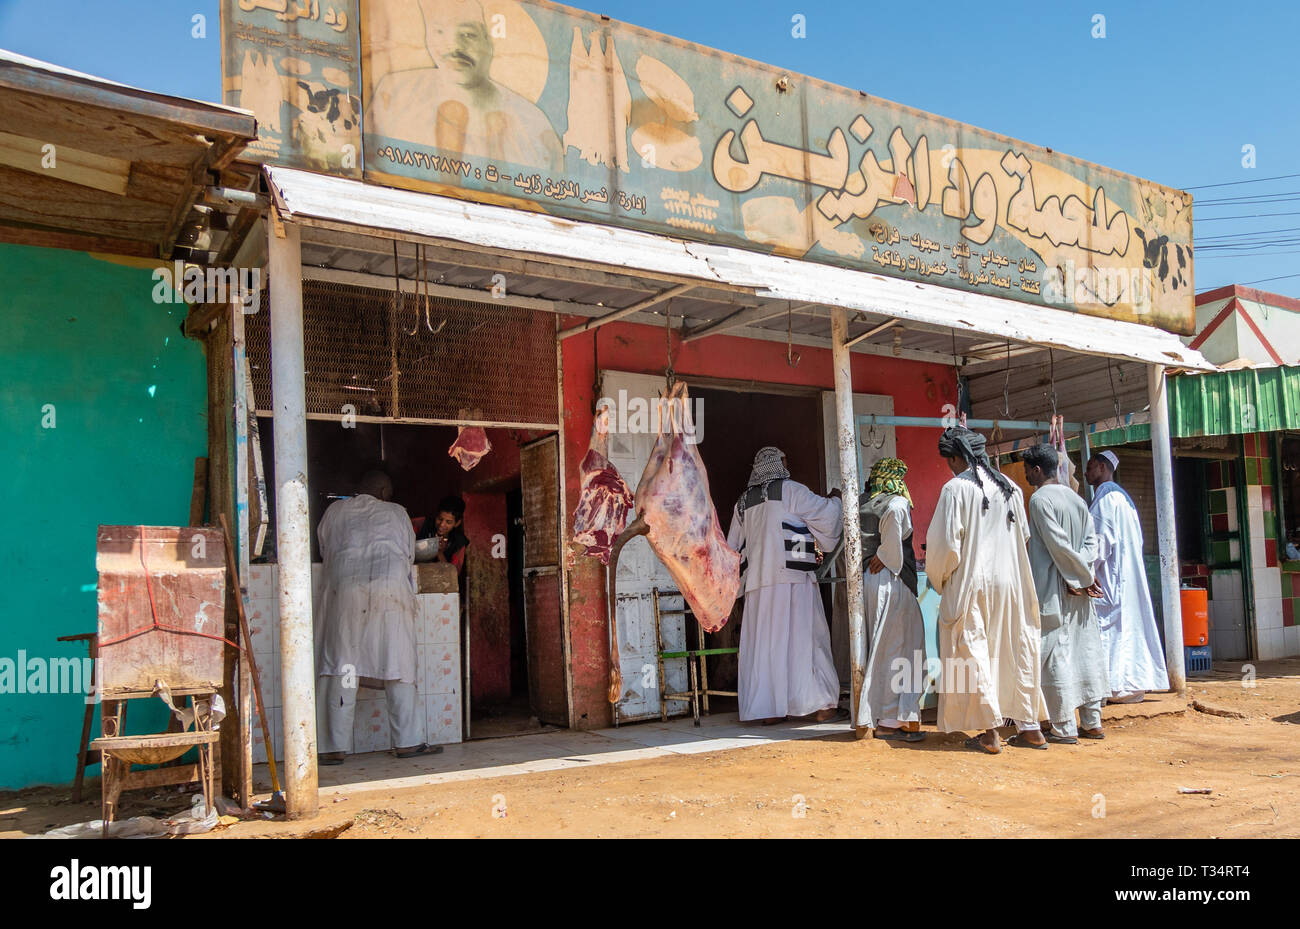 Nuri, Sudan, February 9., 2019: A large piece of beef hangs in front of a butcher's while men negotiate with the butcher in caftans and turban. Stock Photo